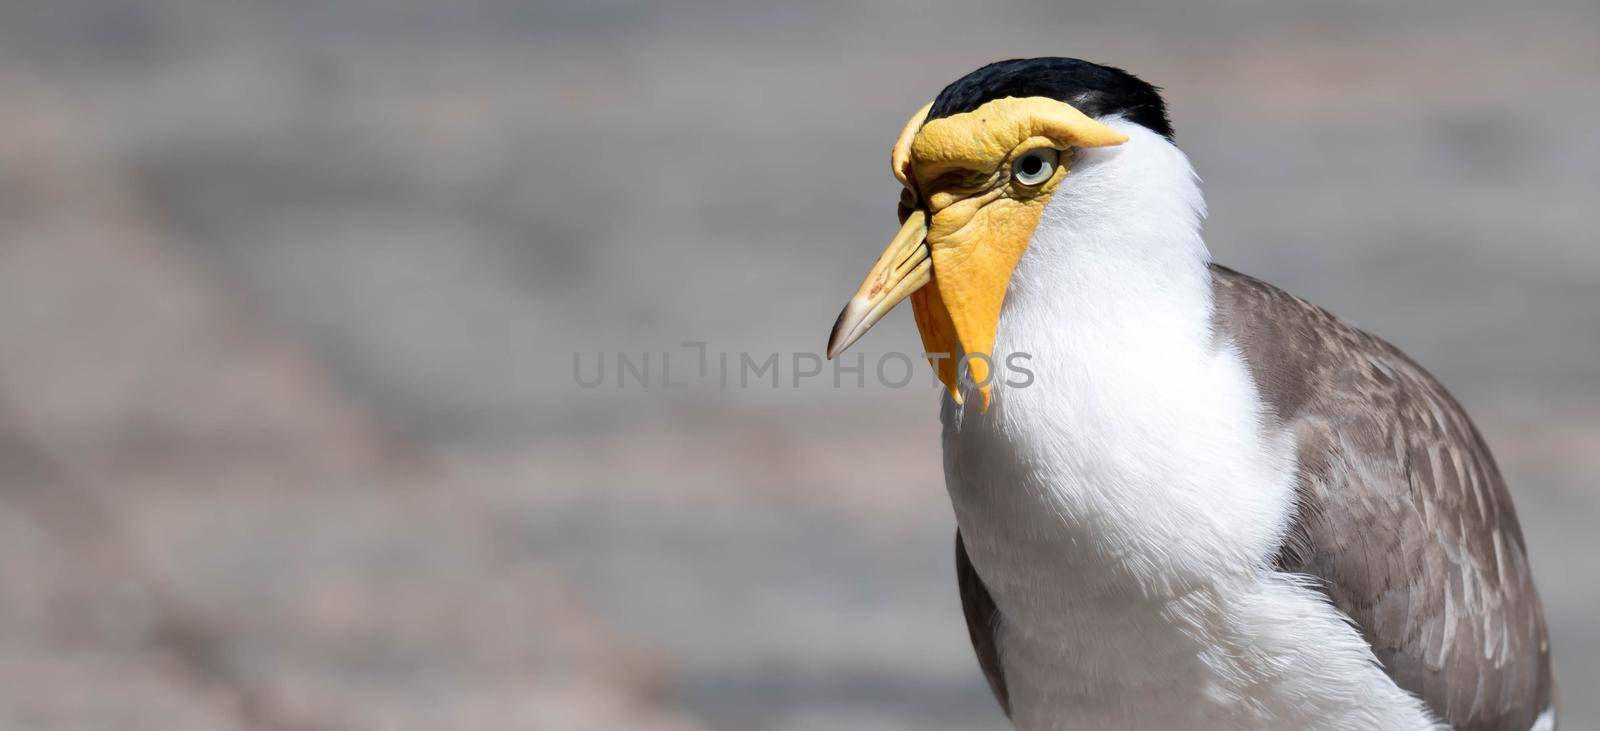 Close up shot of Masked lapwing (Vanellus miles), commonly known in Asia as derpy bird or durian faced bird by billroque